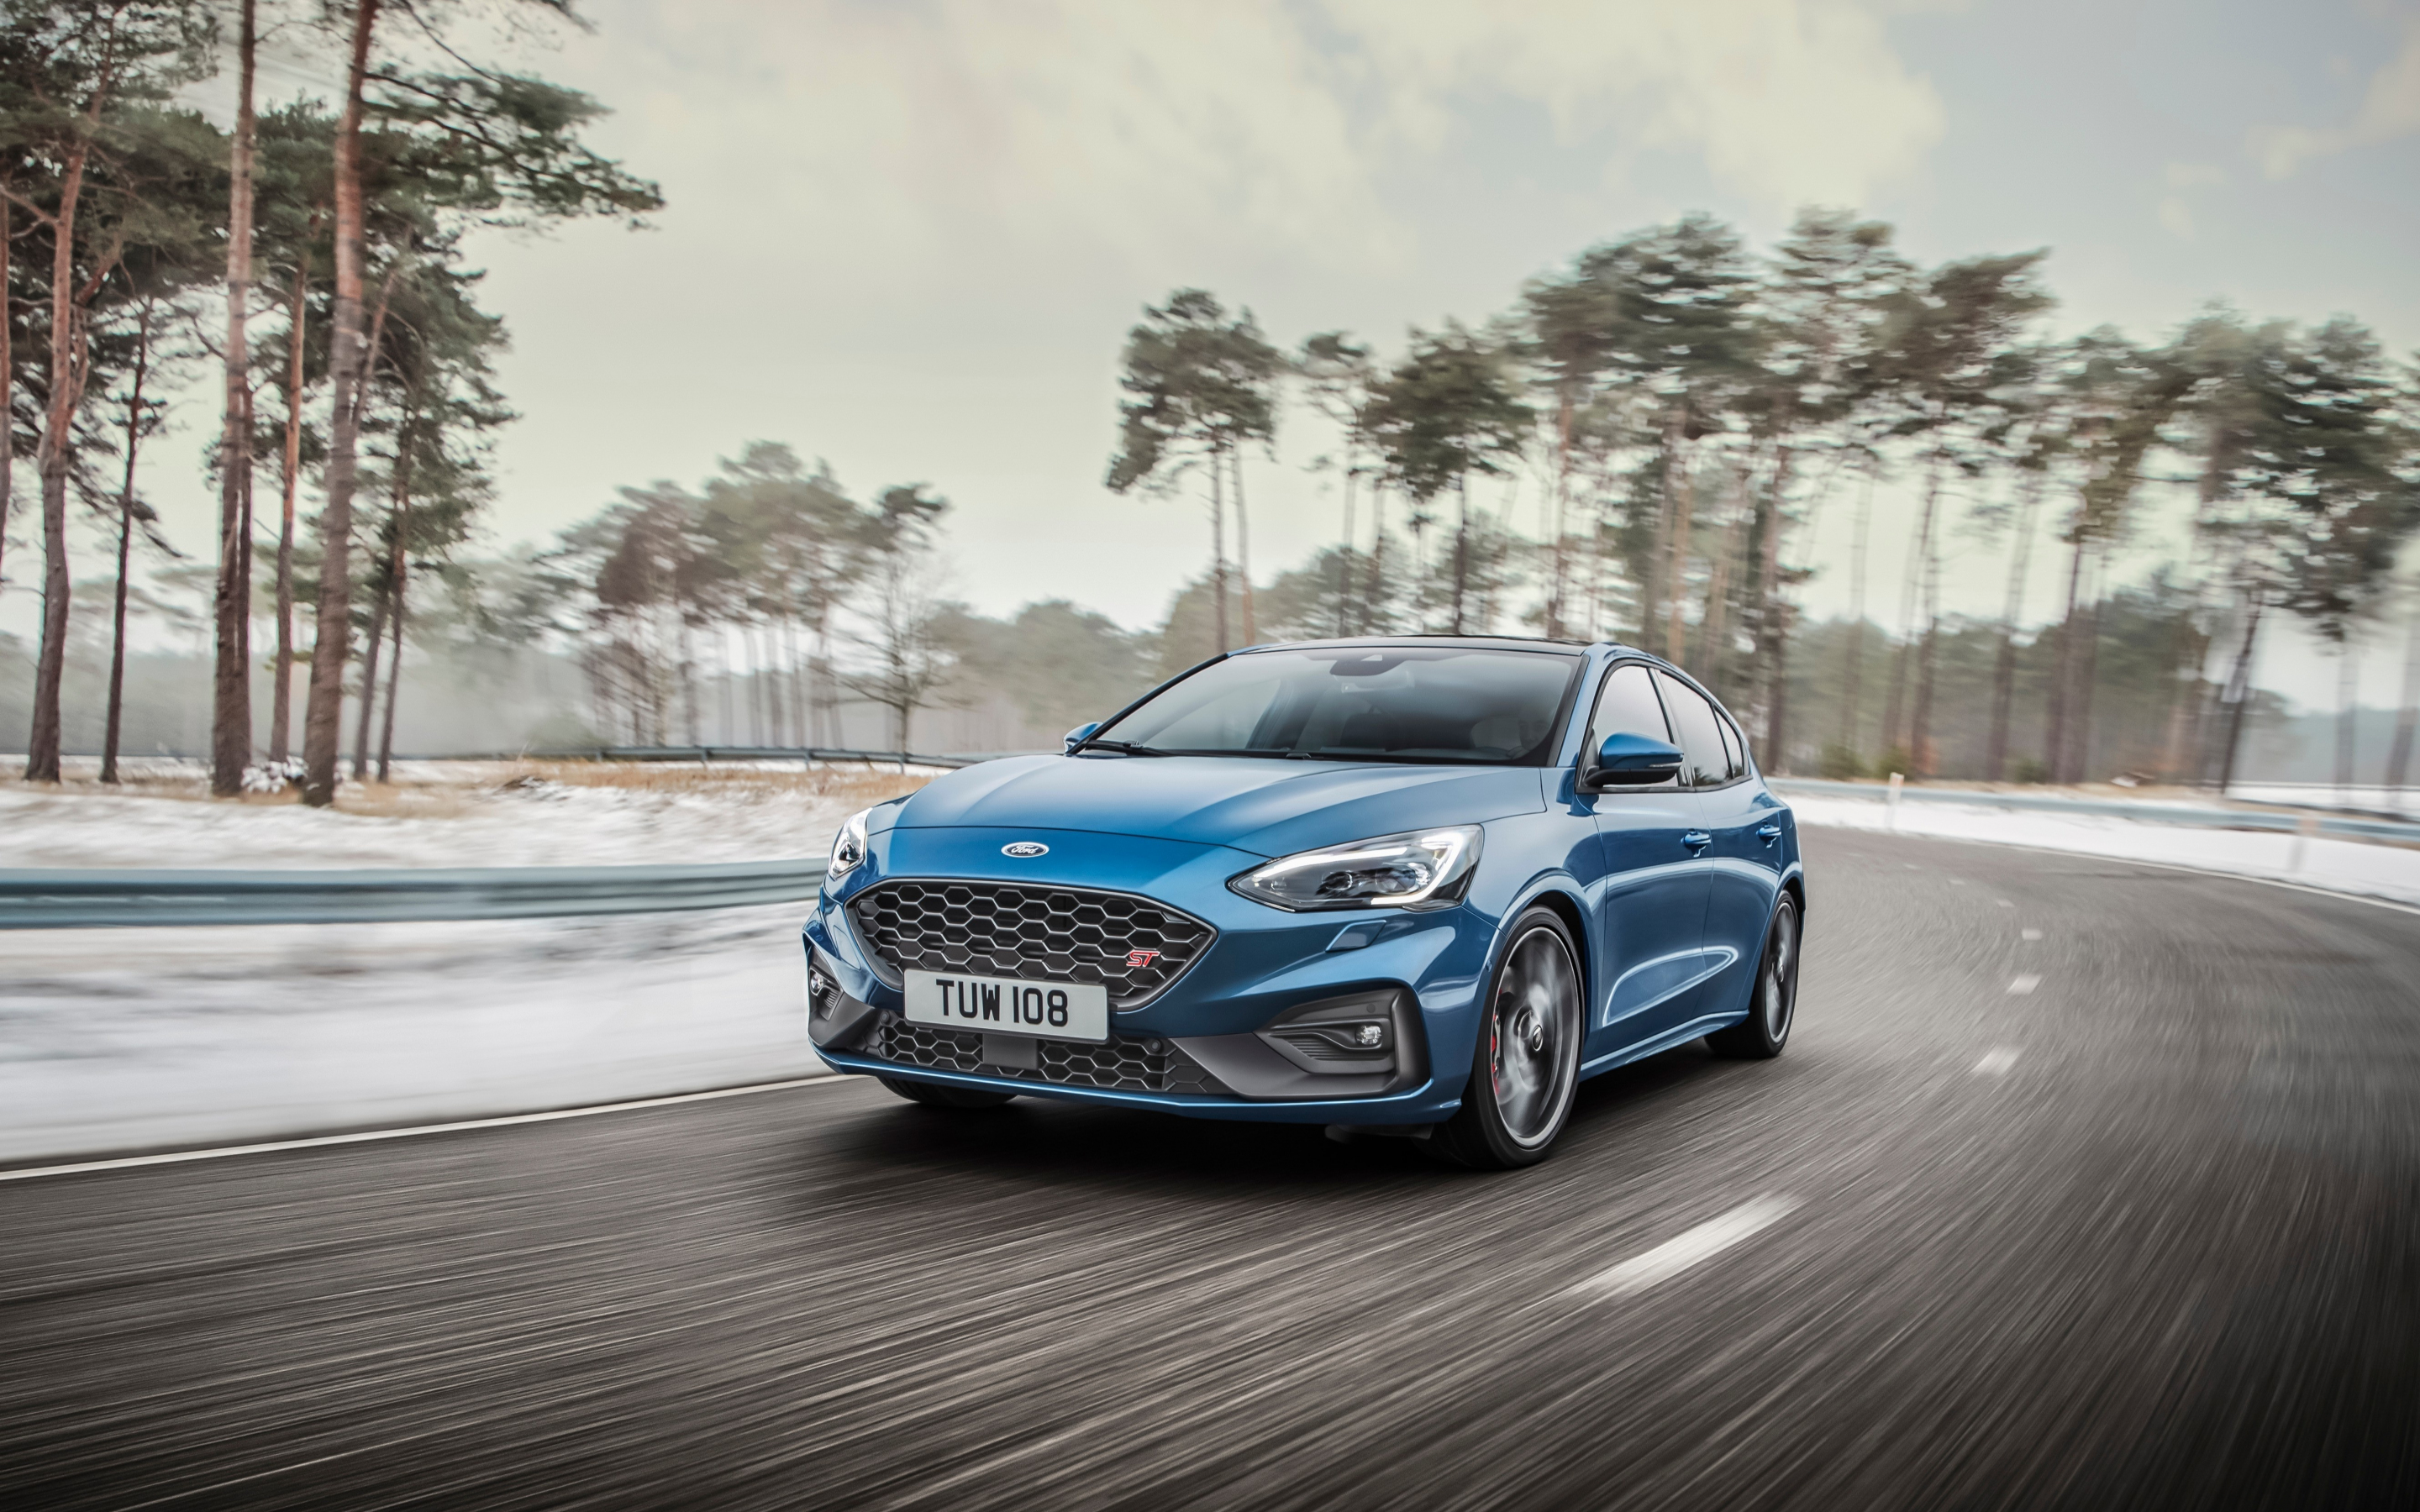 Ford Focus ST, on-road, 2019, 2880x1800 wallpaper